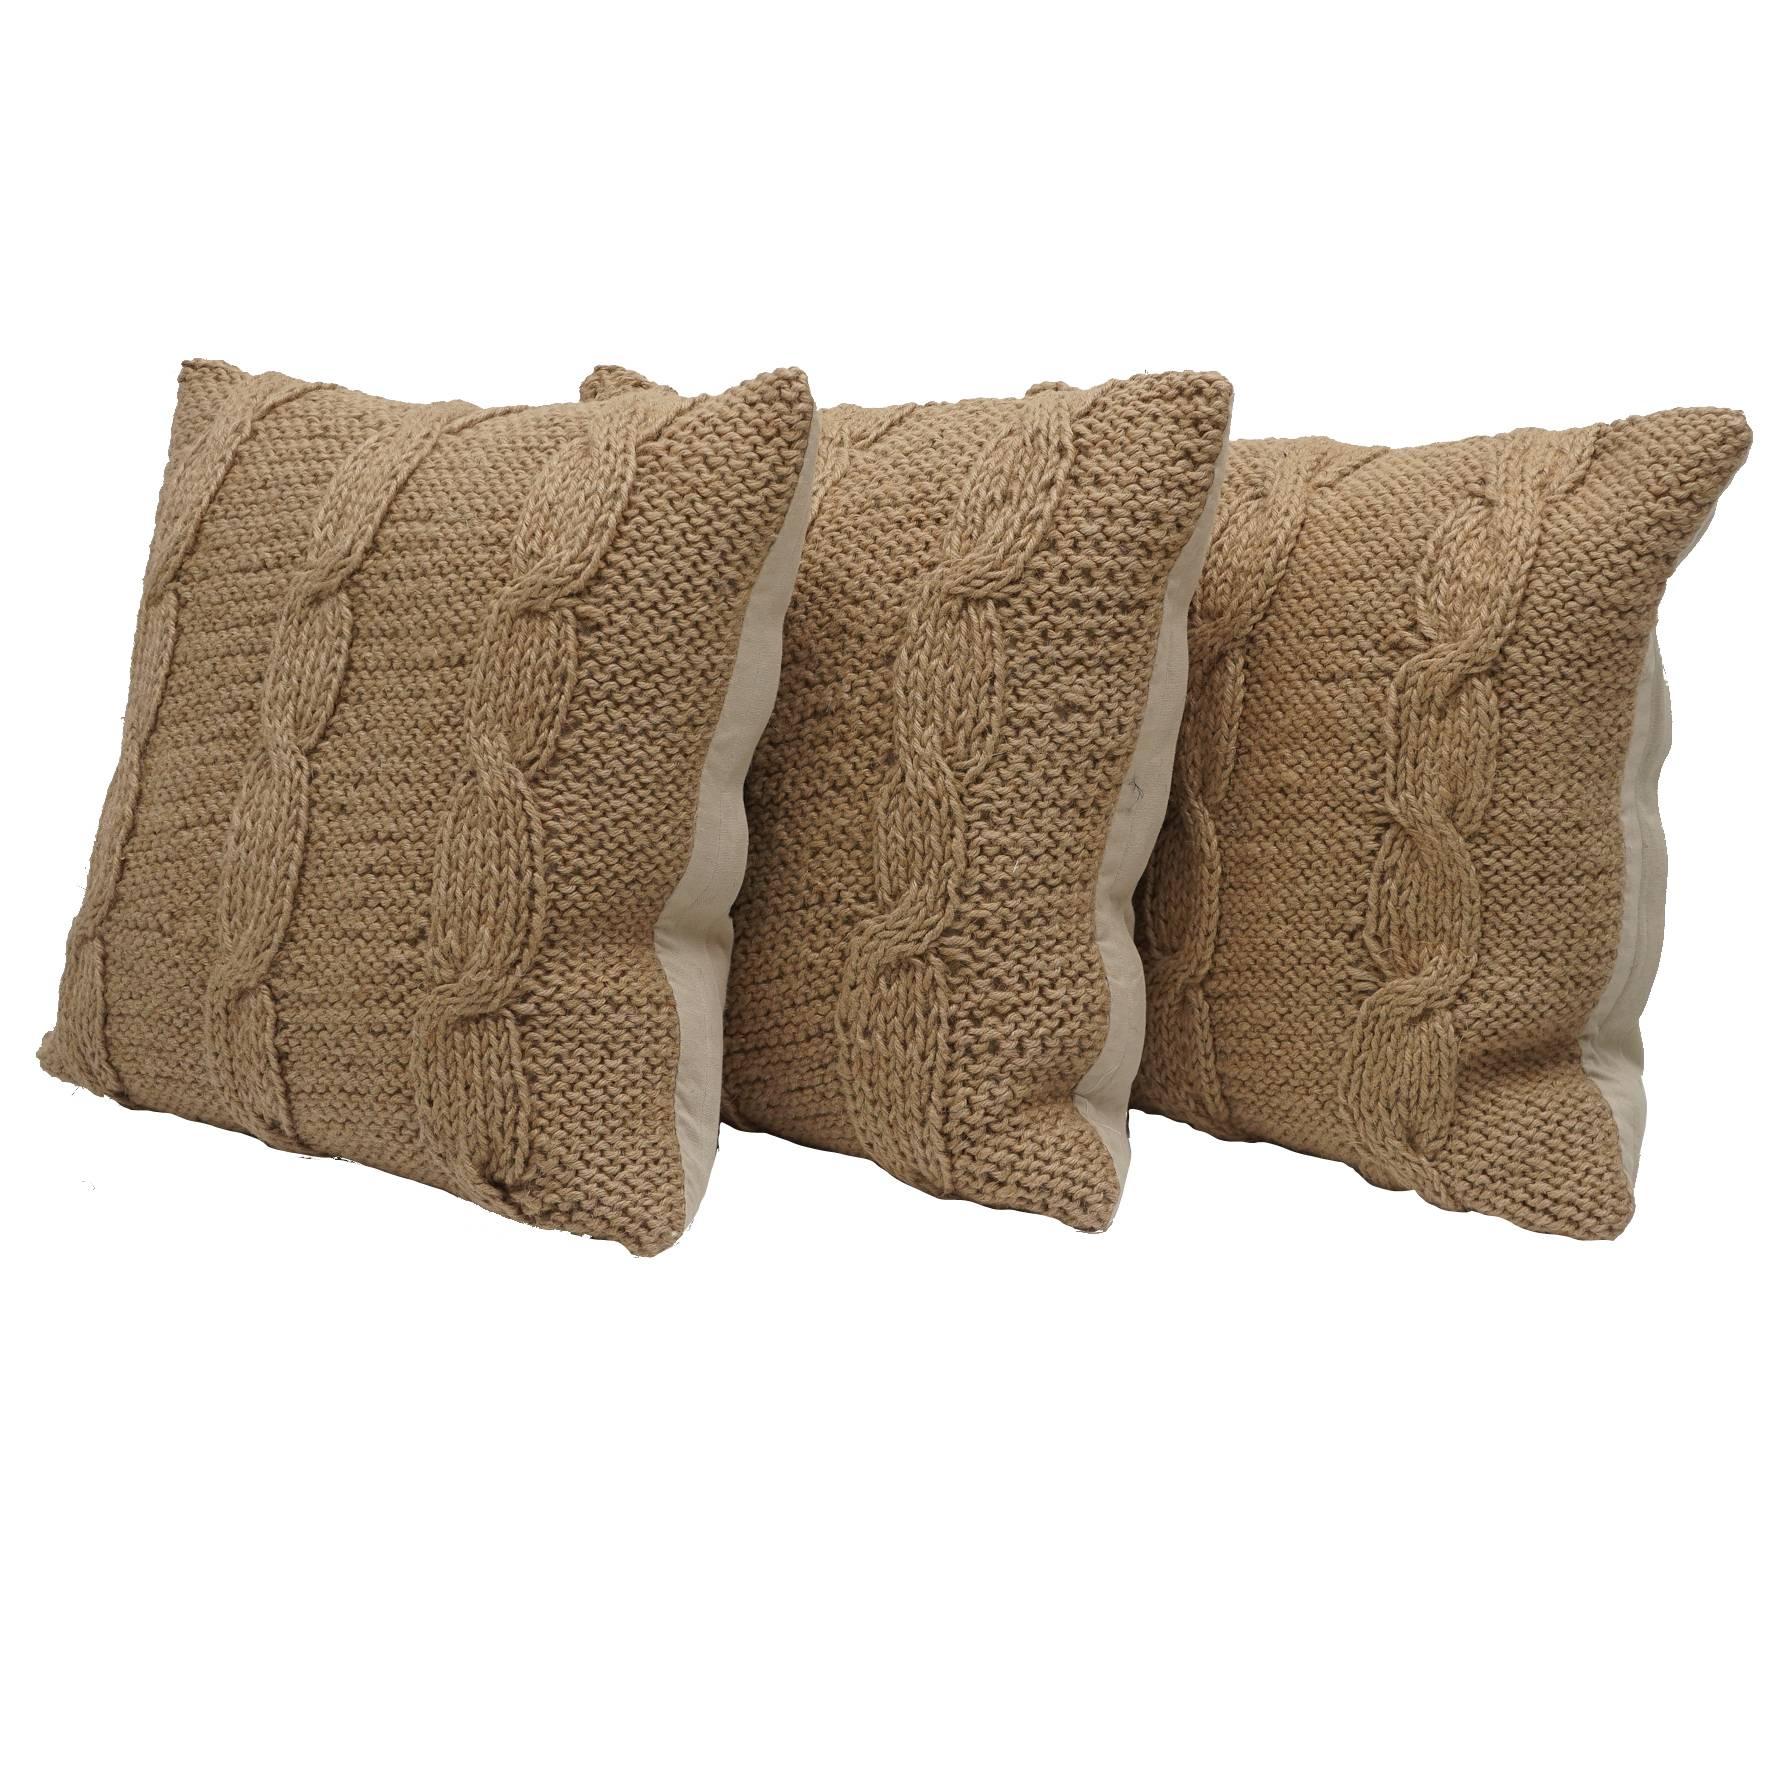 Cable Knit Hemp Pillows For Sale